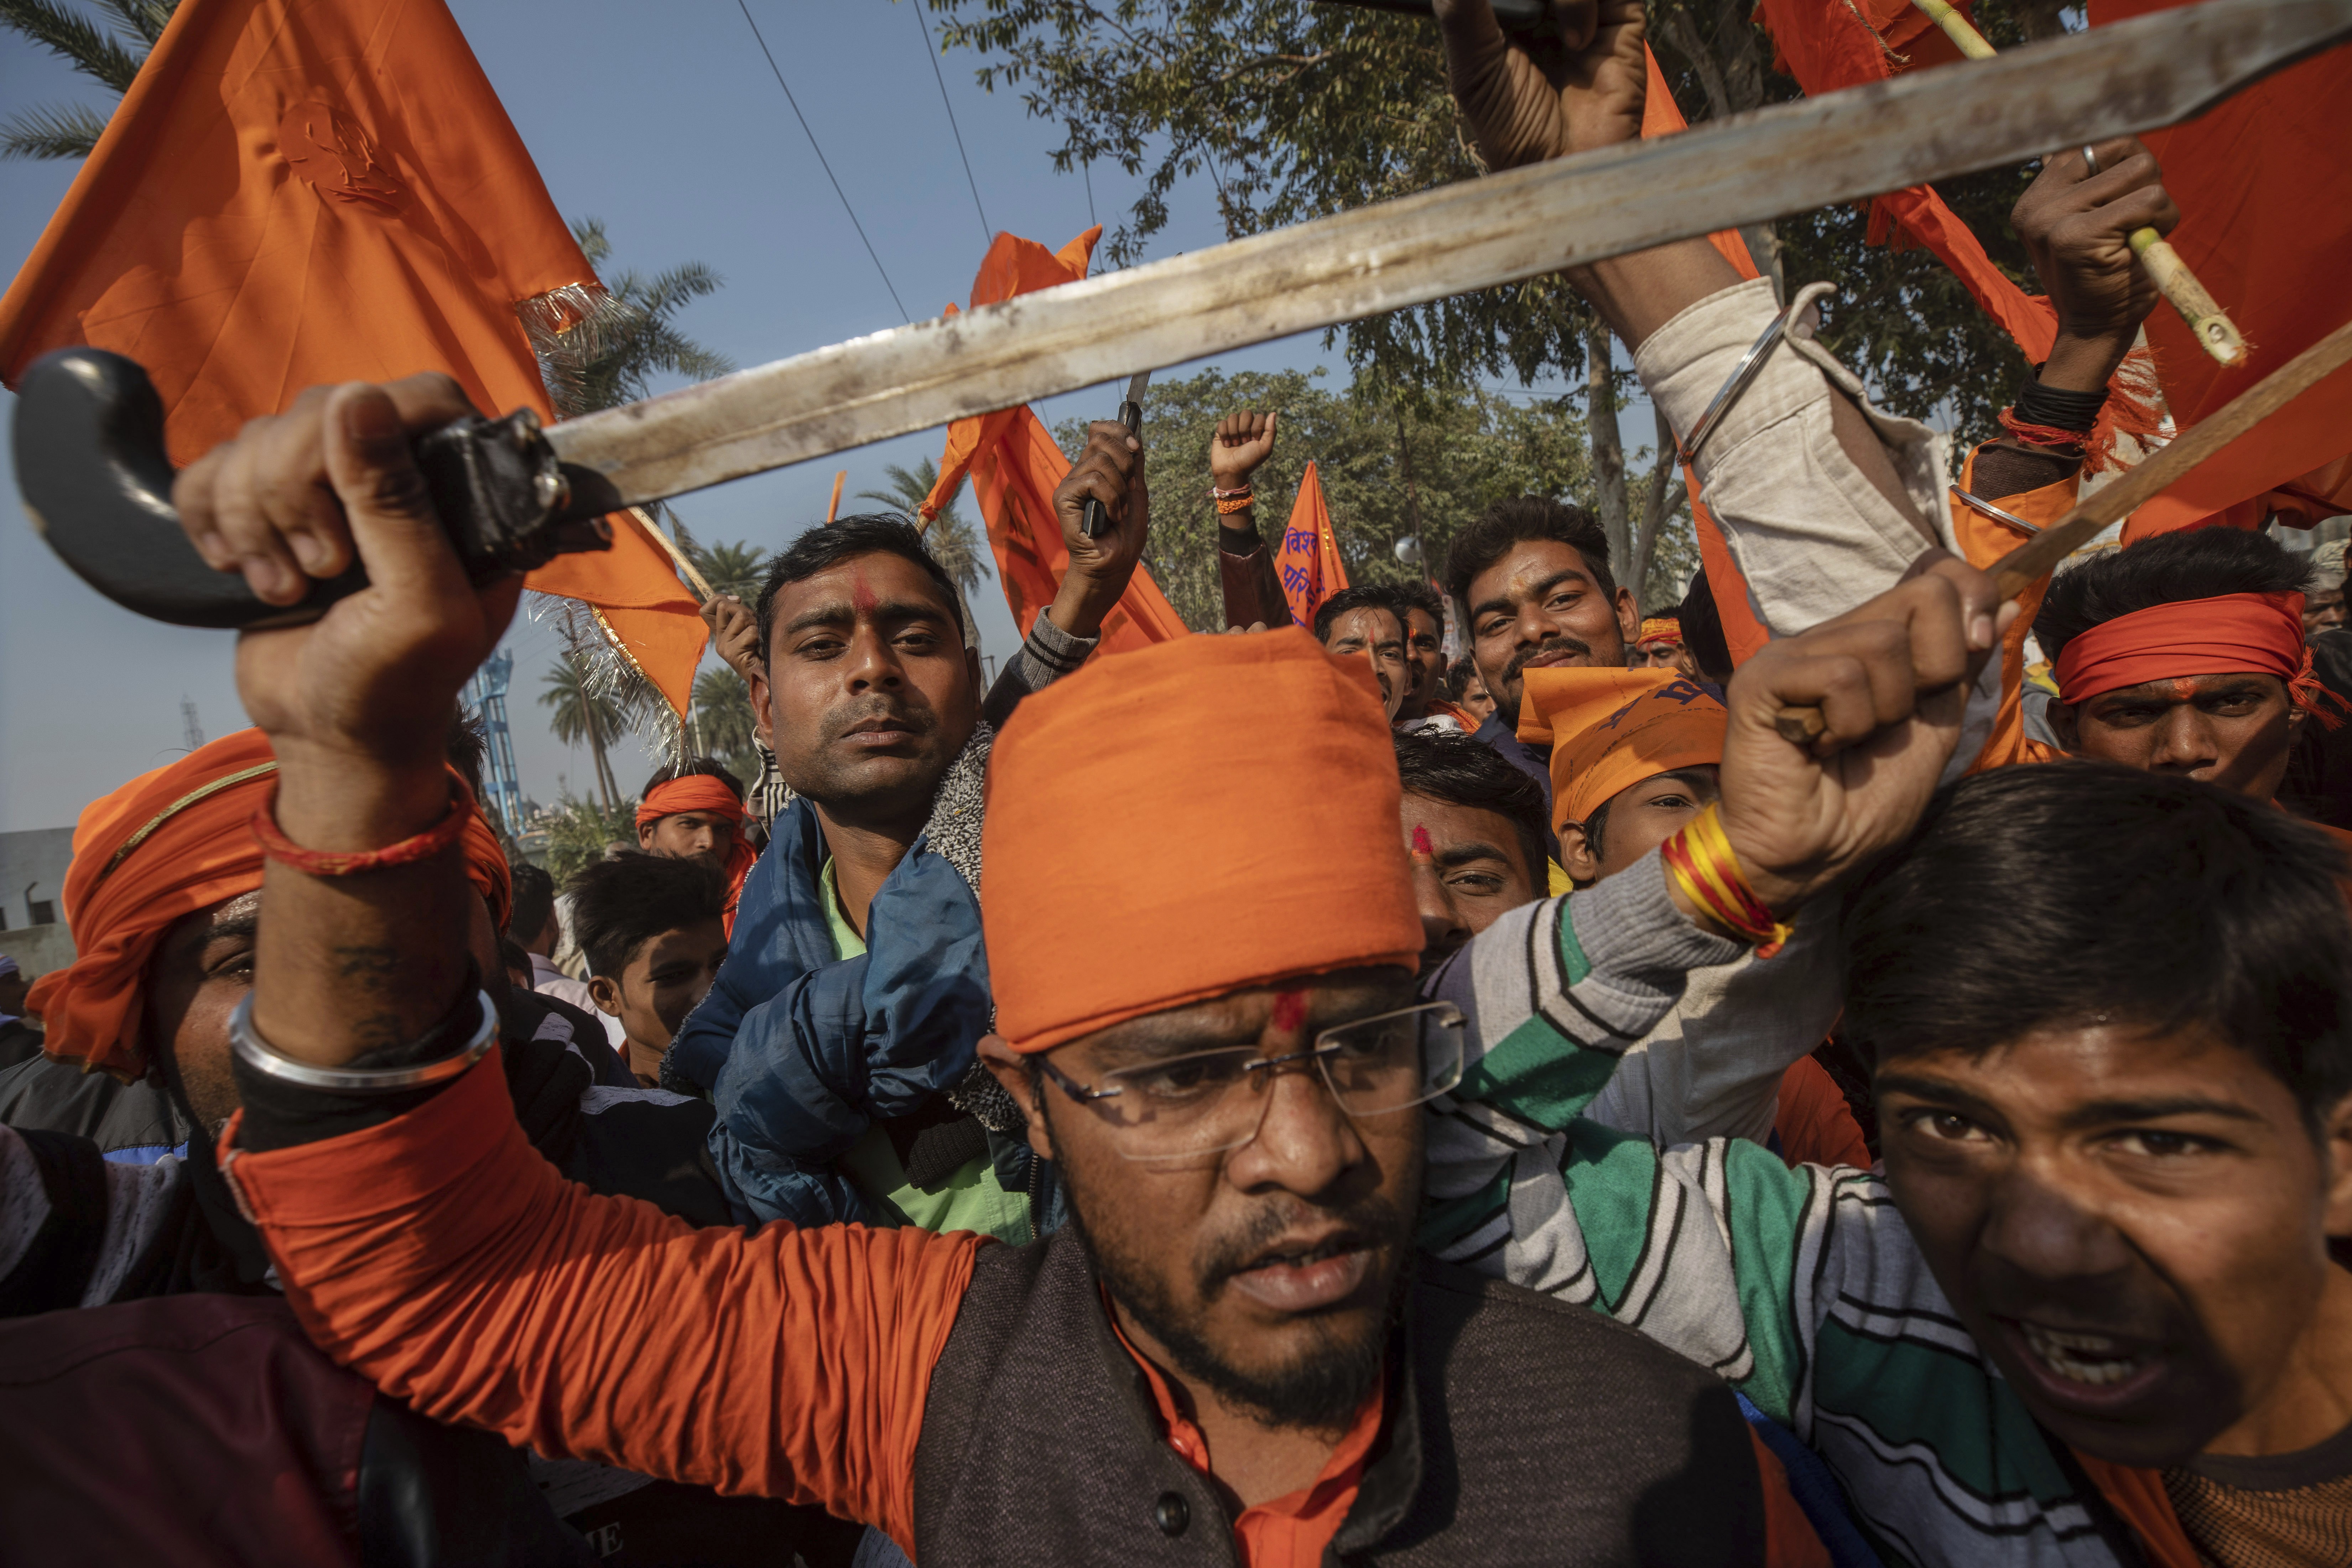 Hindu hardliners, one holding a sword, chant slogans against Muslim communities in northern India. Photo: AP